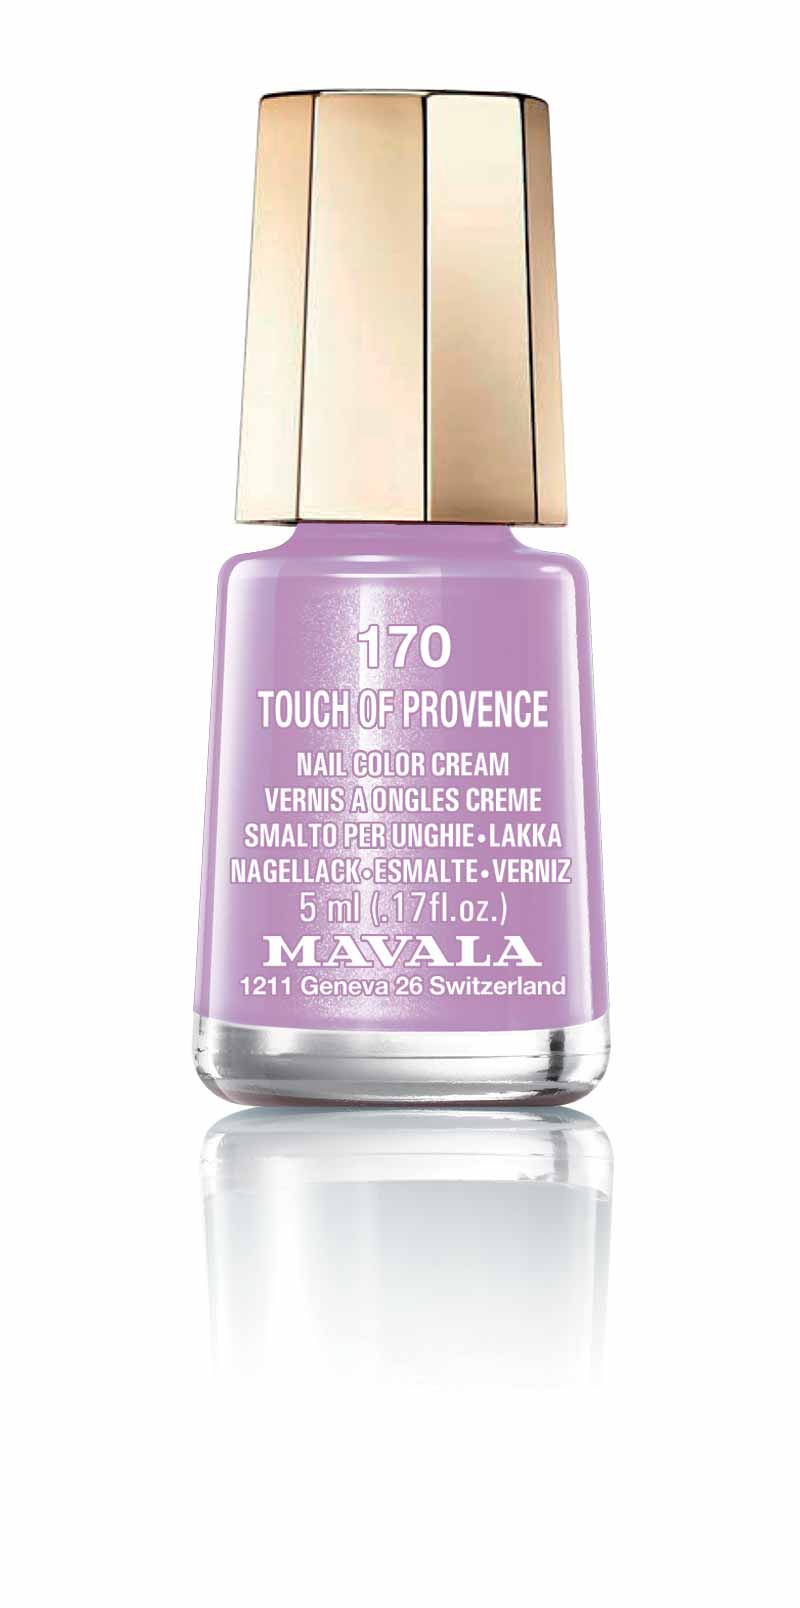 170 TOUCH OF PROVENCE